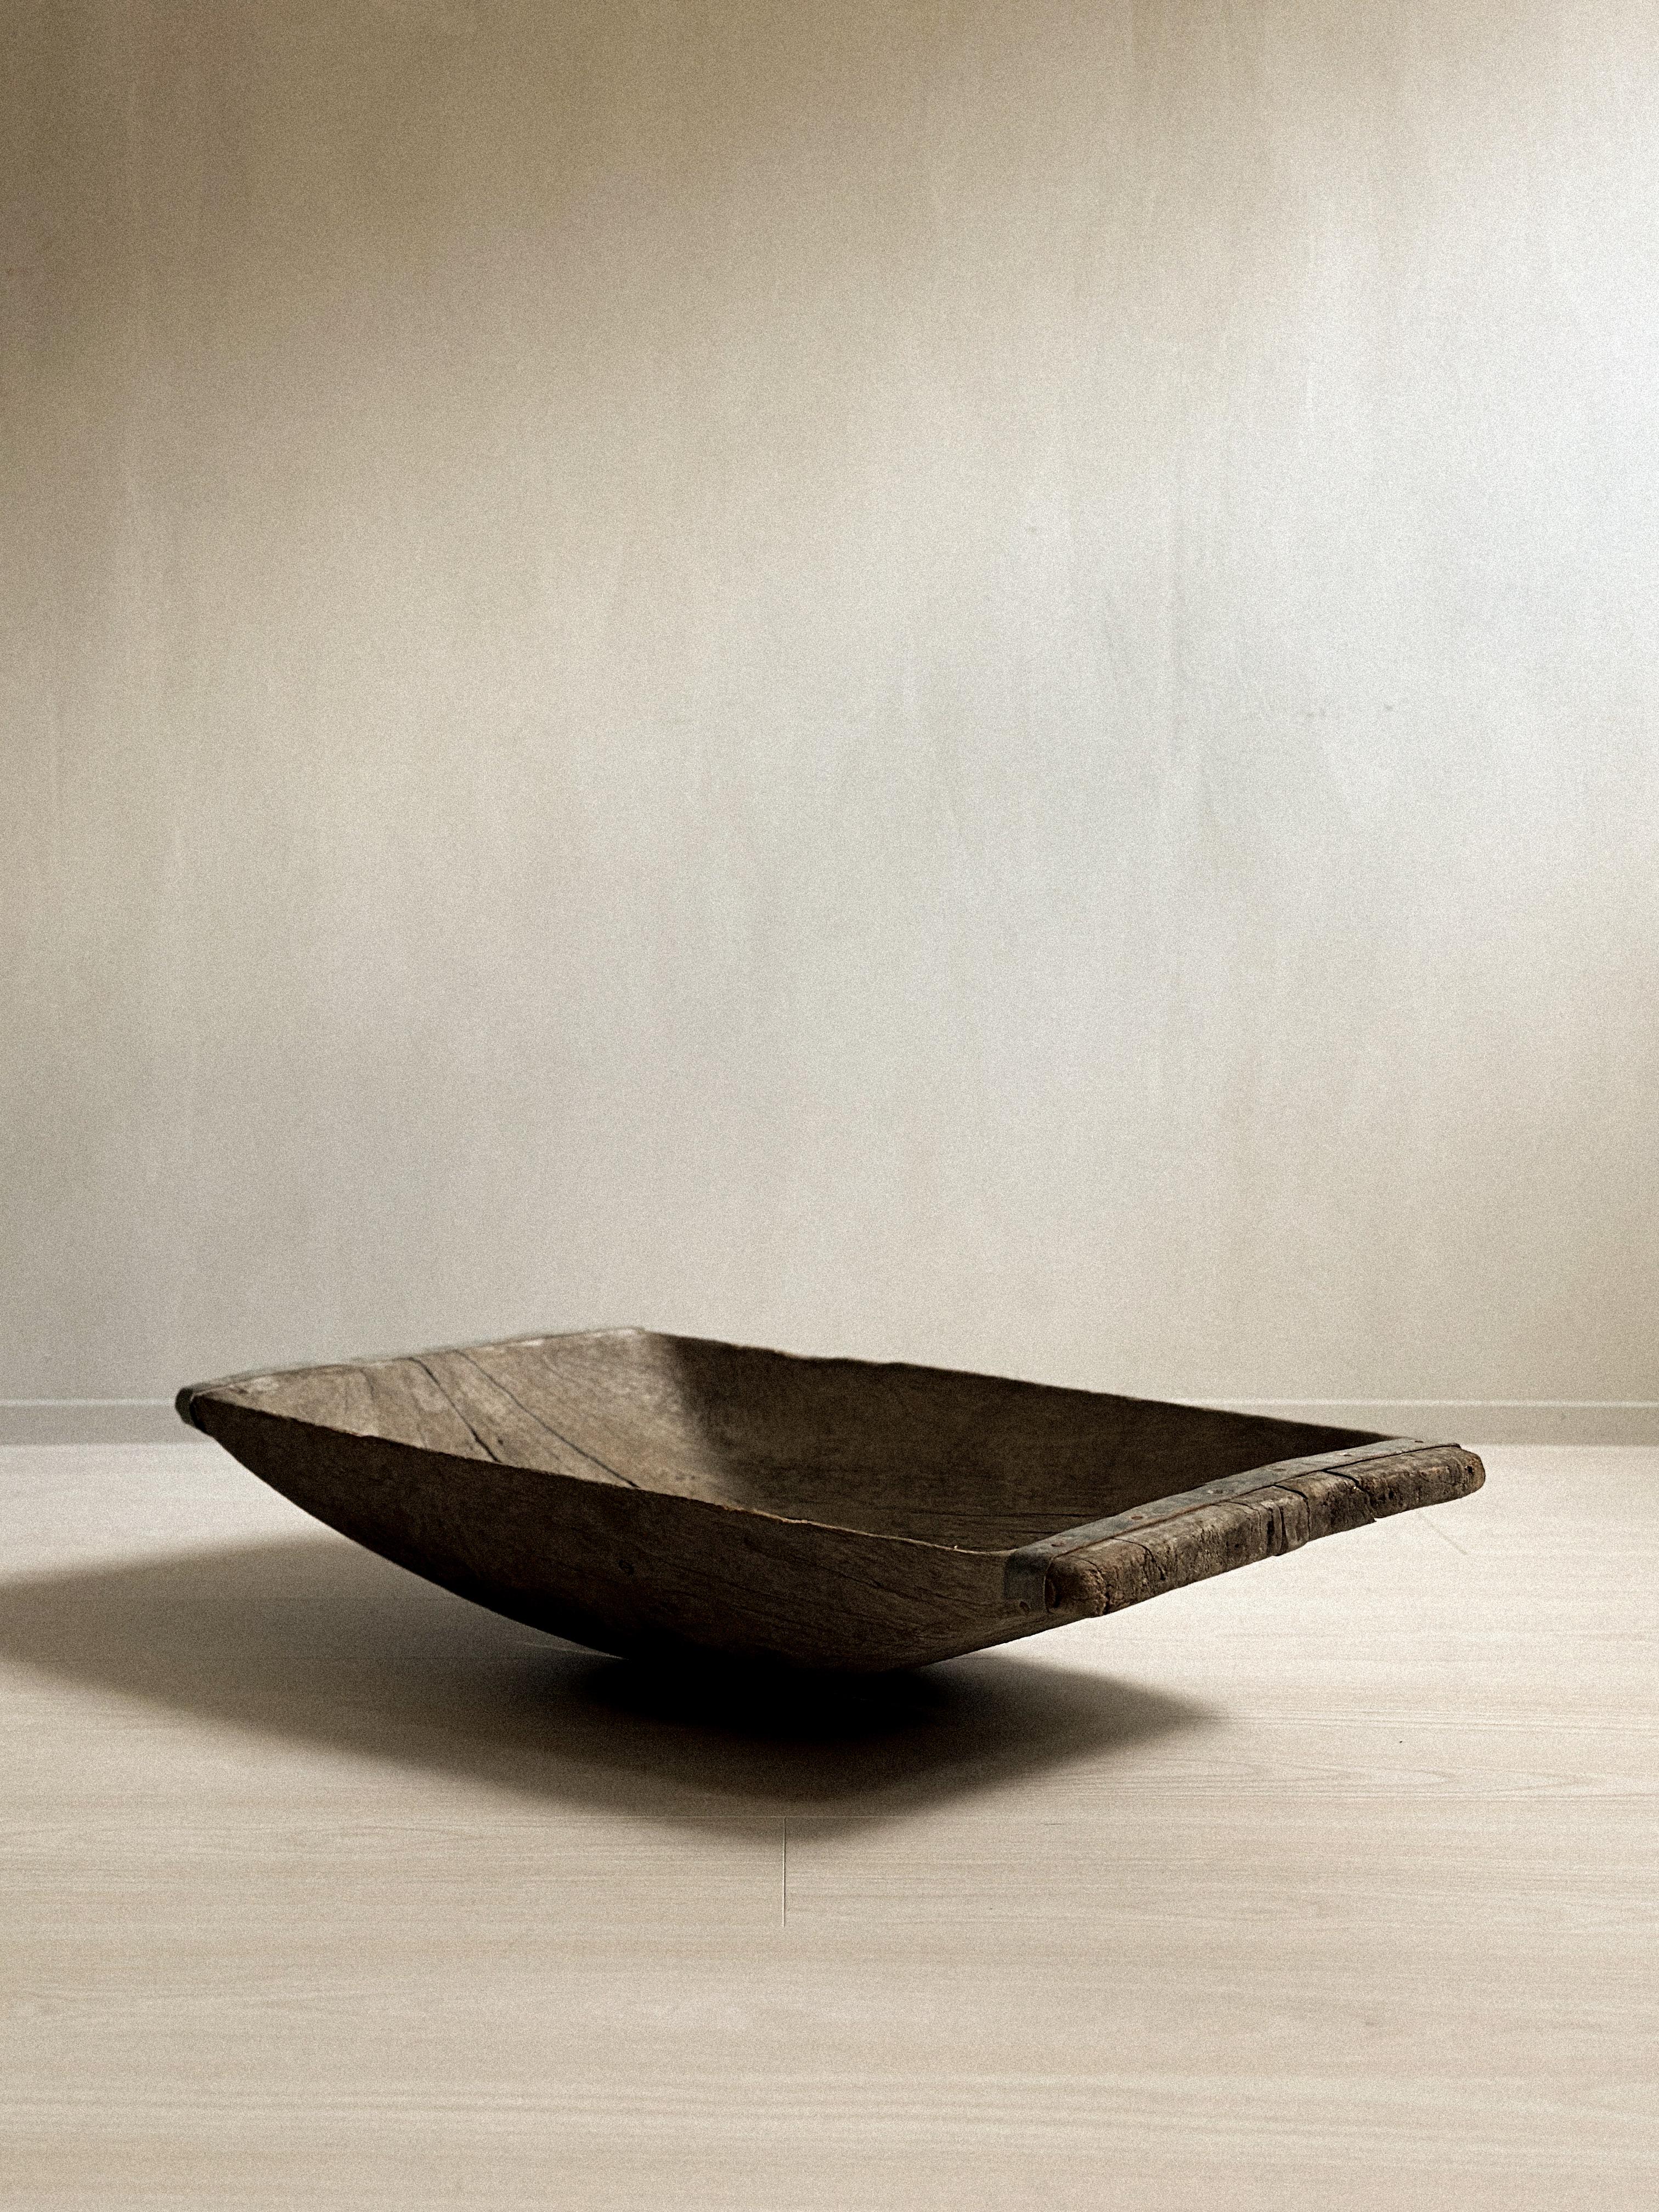 A large antique wabi sabi tray with heavy patina from age and use. Old repiars with metal. 